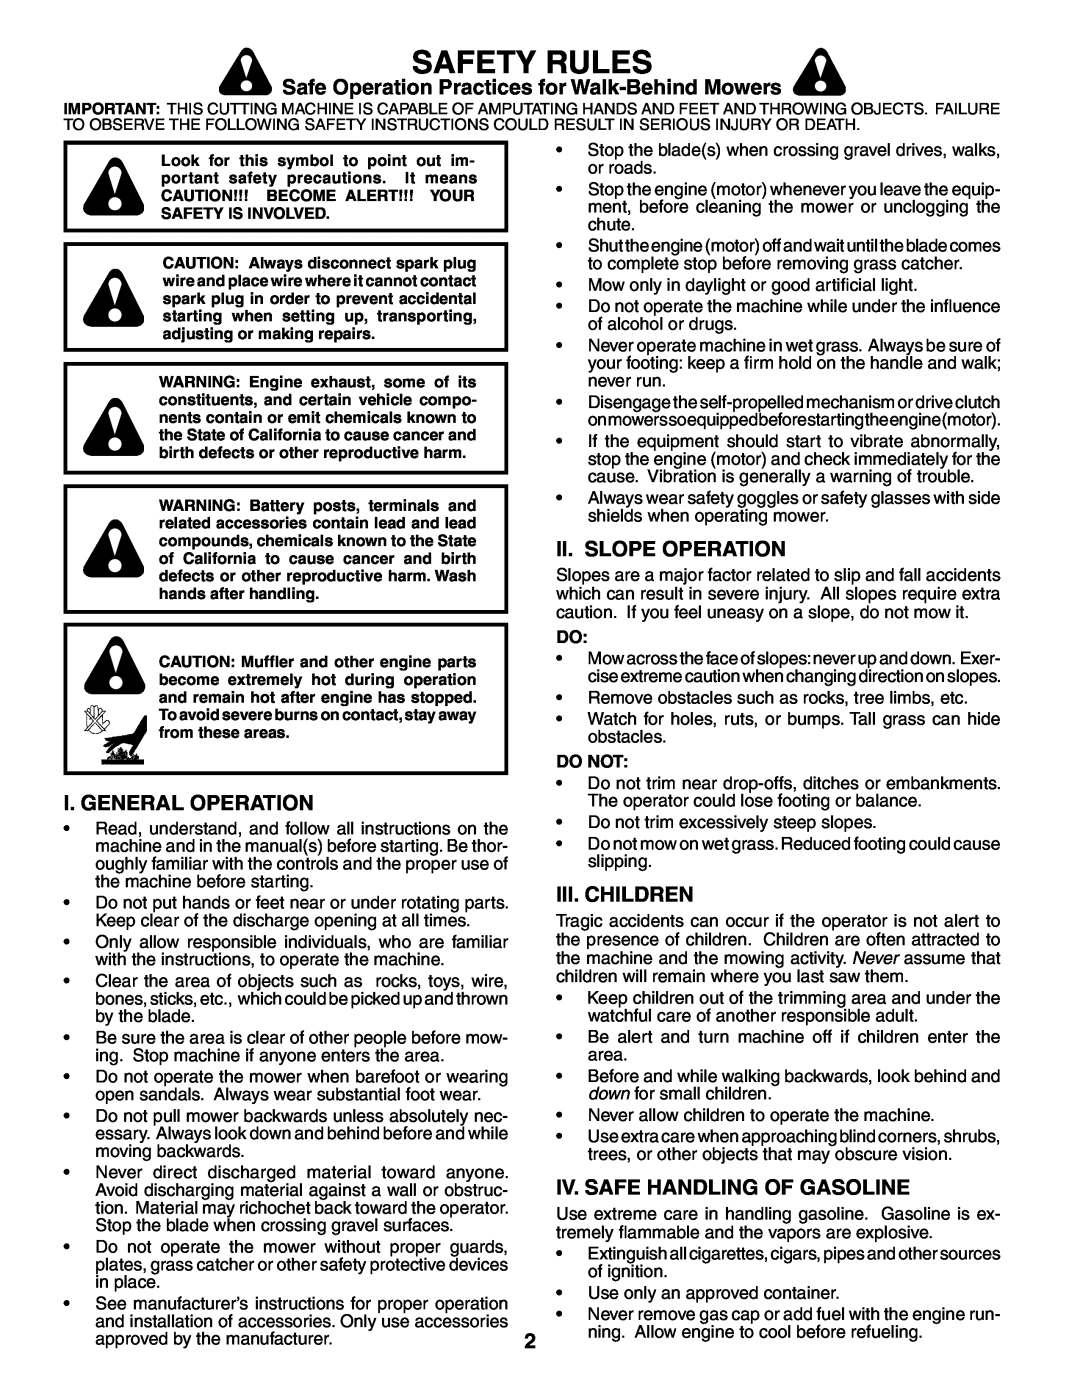 Husqvarna 917.37595 Safety Rules, Safe Operation Practices for Walk-Behind Mowers, Ii. Slope Operation, Iii. Children 